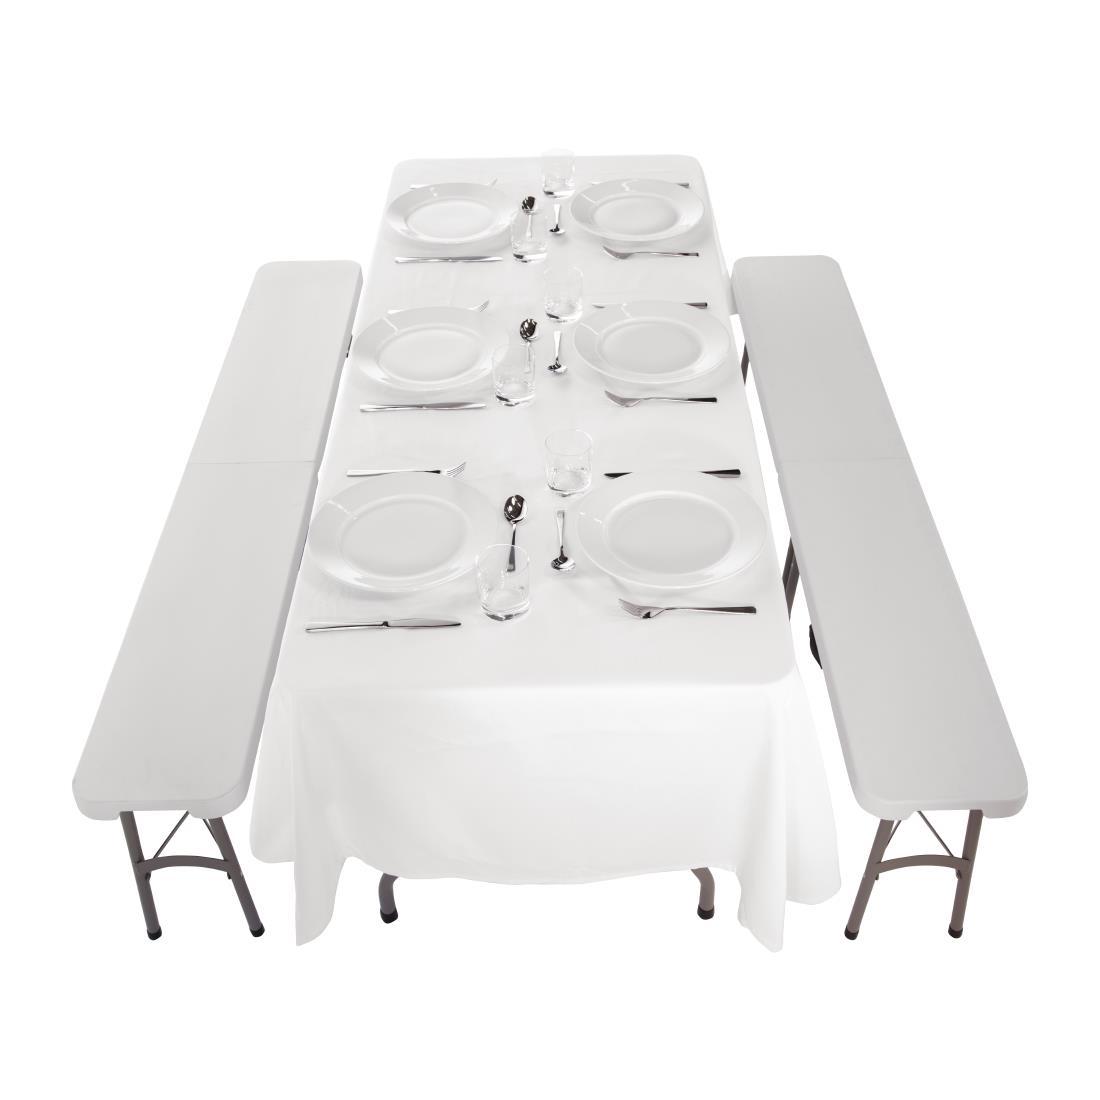 Special Offer Bolero PE Centre Folding Table 6ft with Two Folding Benches - SA425  - 4